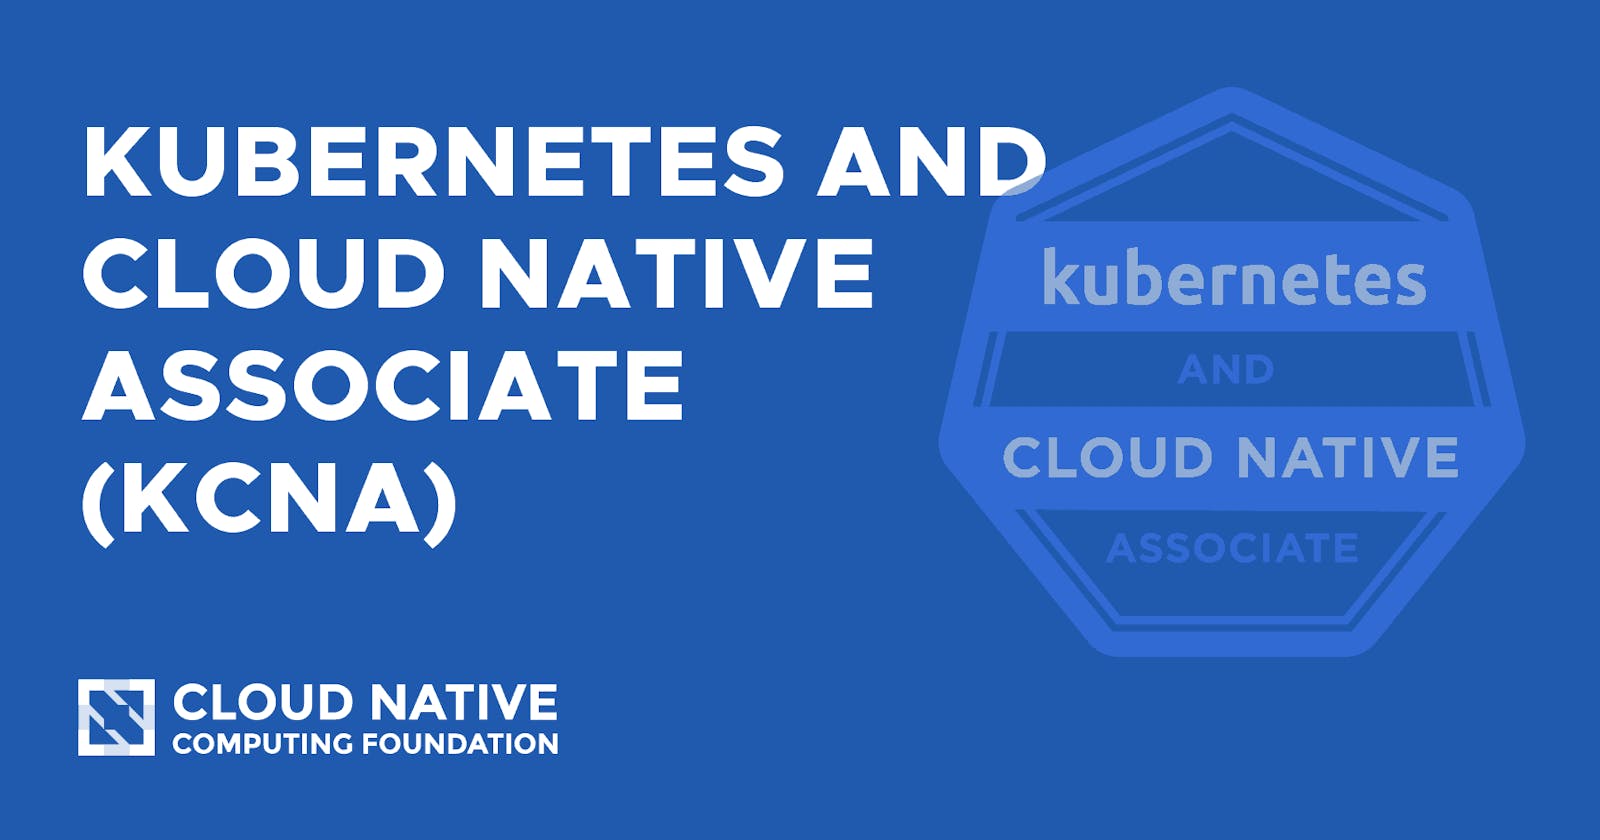 How to Pass the KCNA Exam - Mastering Kubernetes Fundamentals and Cloud-Native Concepts